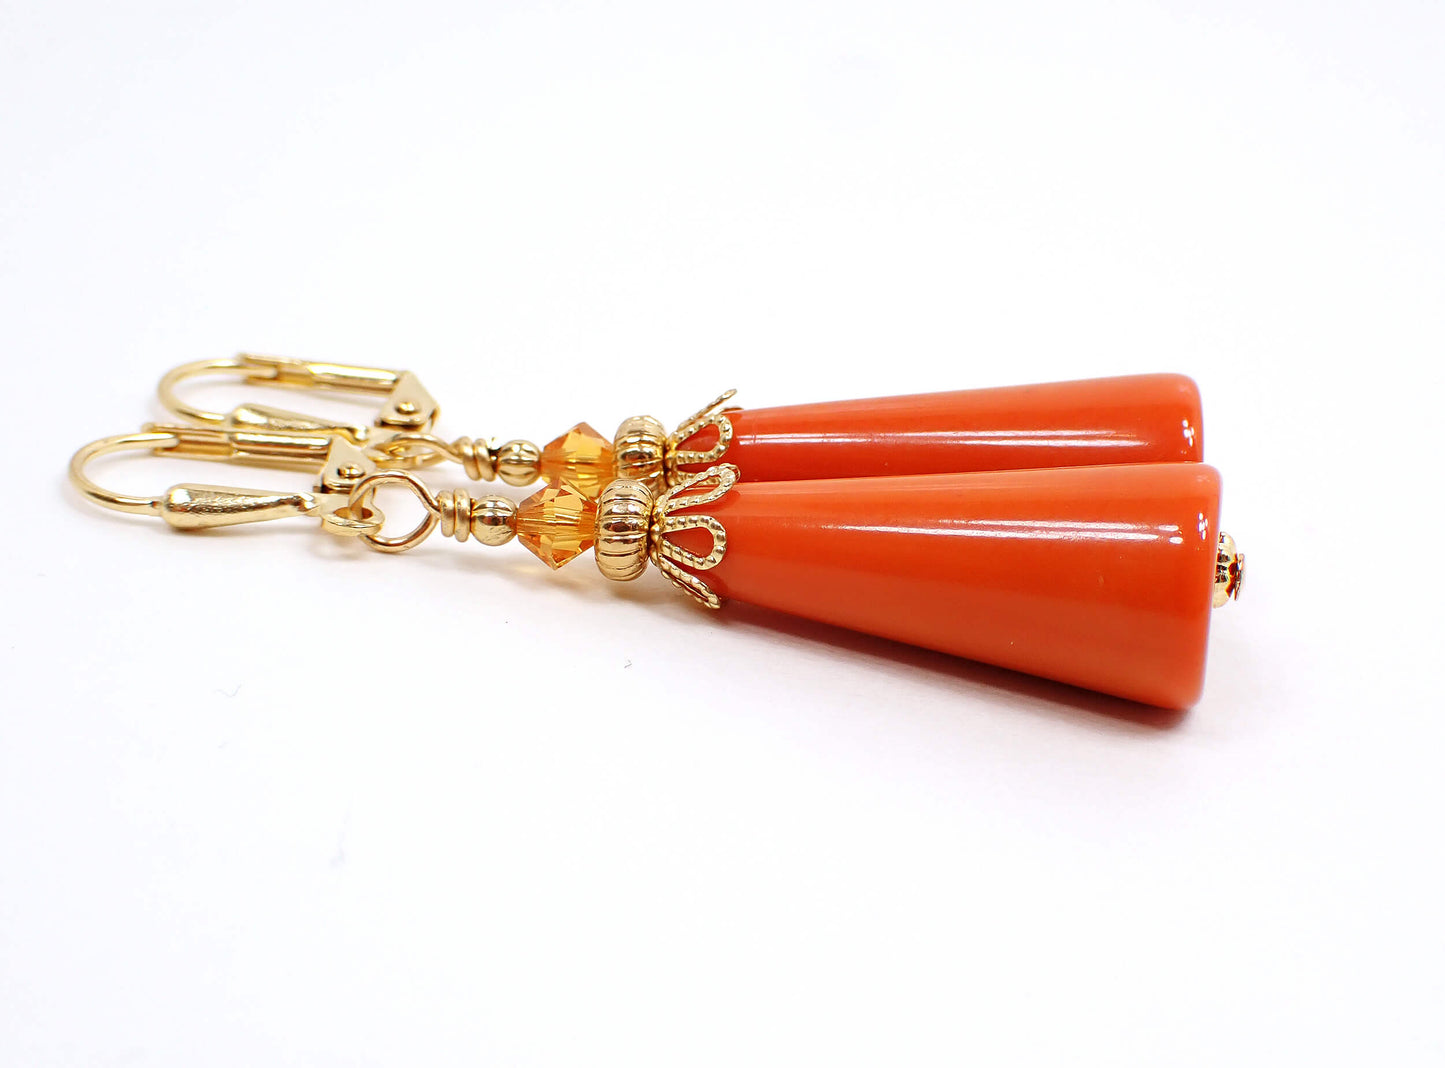 Burnt Orange Lucite Handmade Geometric Cone Earrings Gold Plated Hook Lever Back or Clip On